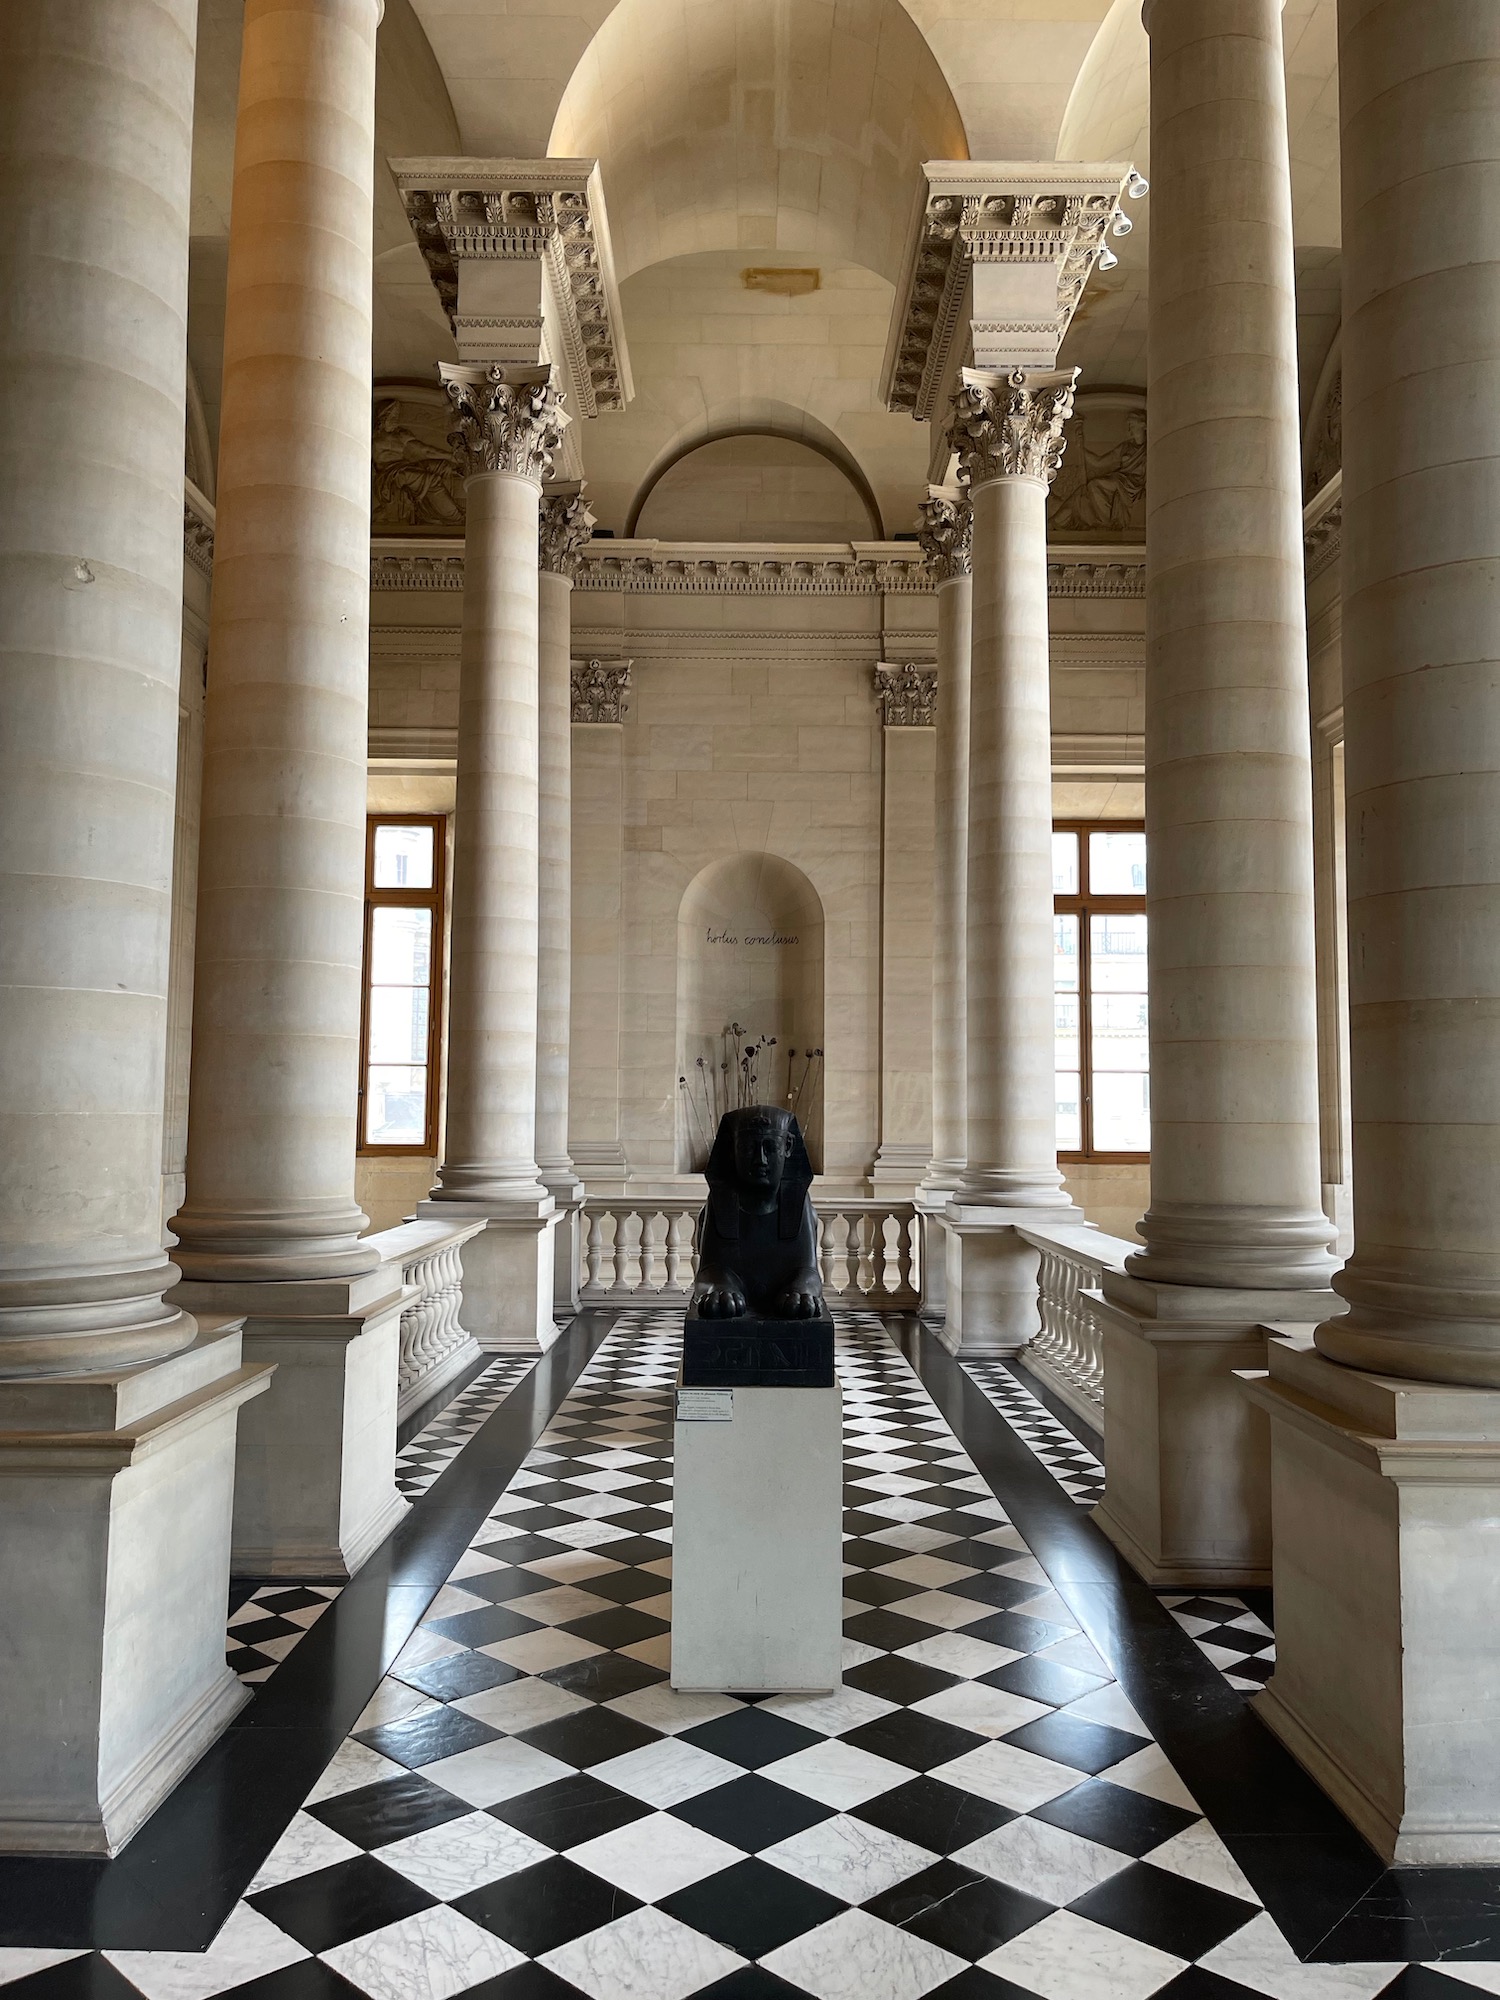 a black statue in a room with columns